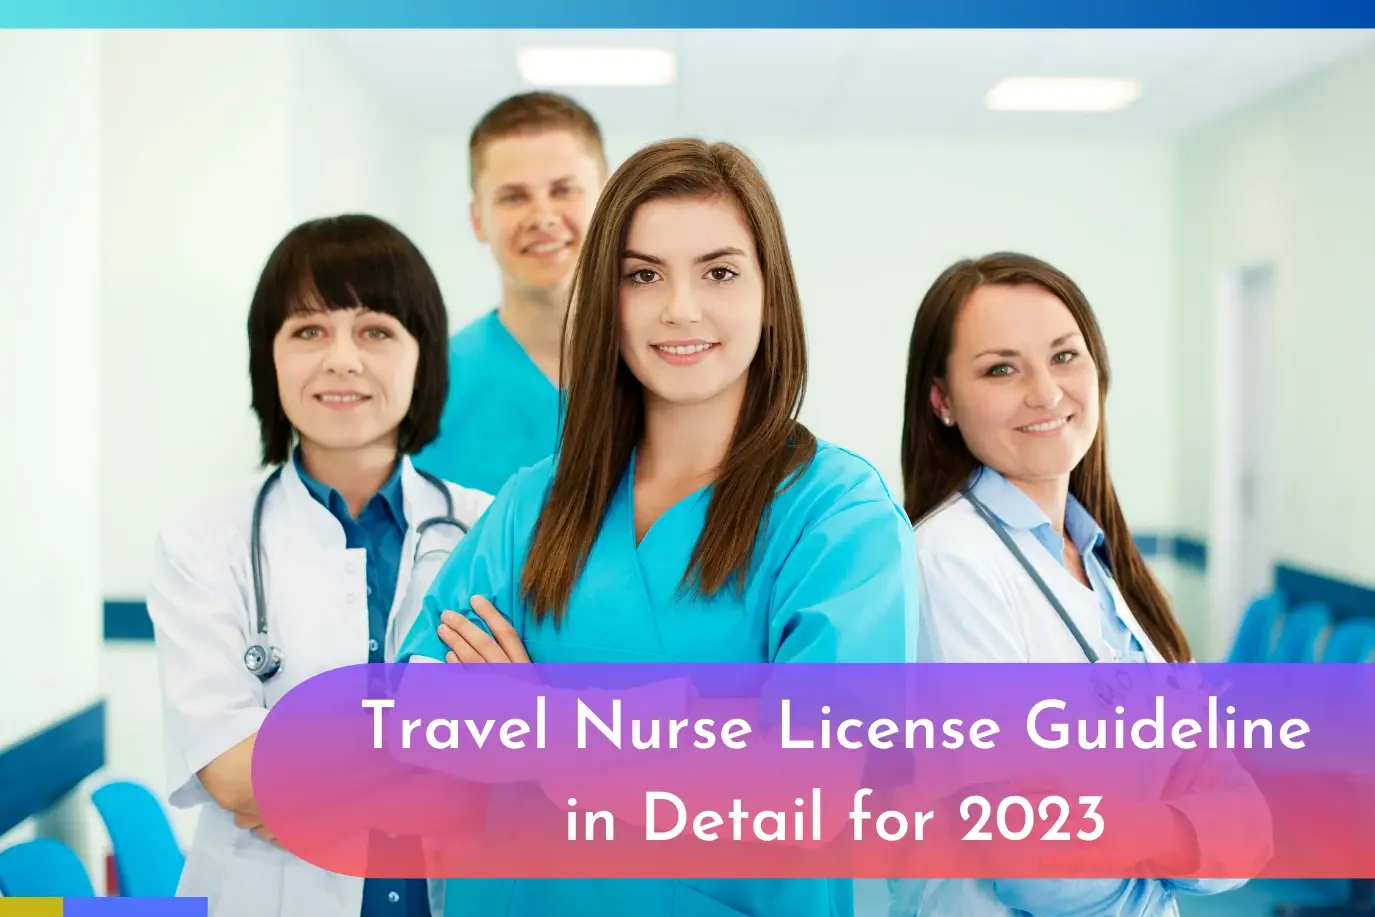 Travel Nurse License Guideline: Easy Steps to Follow